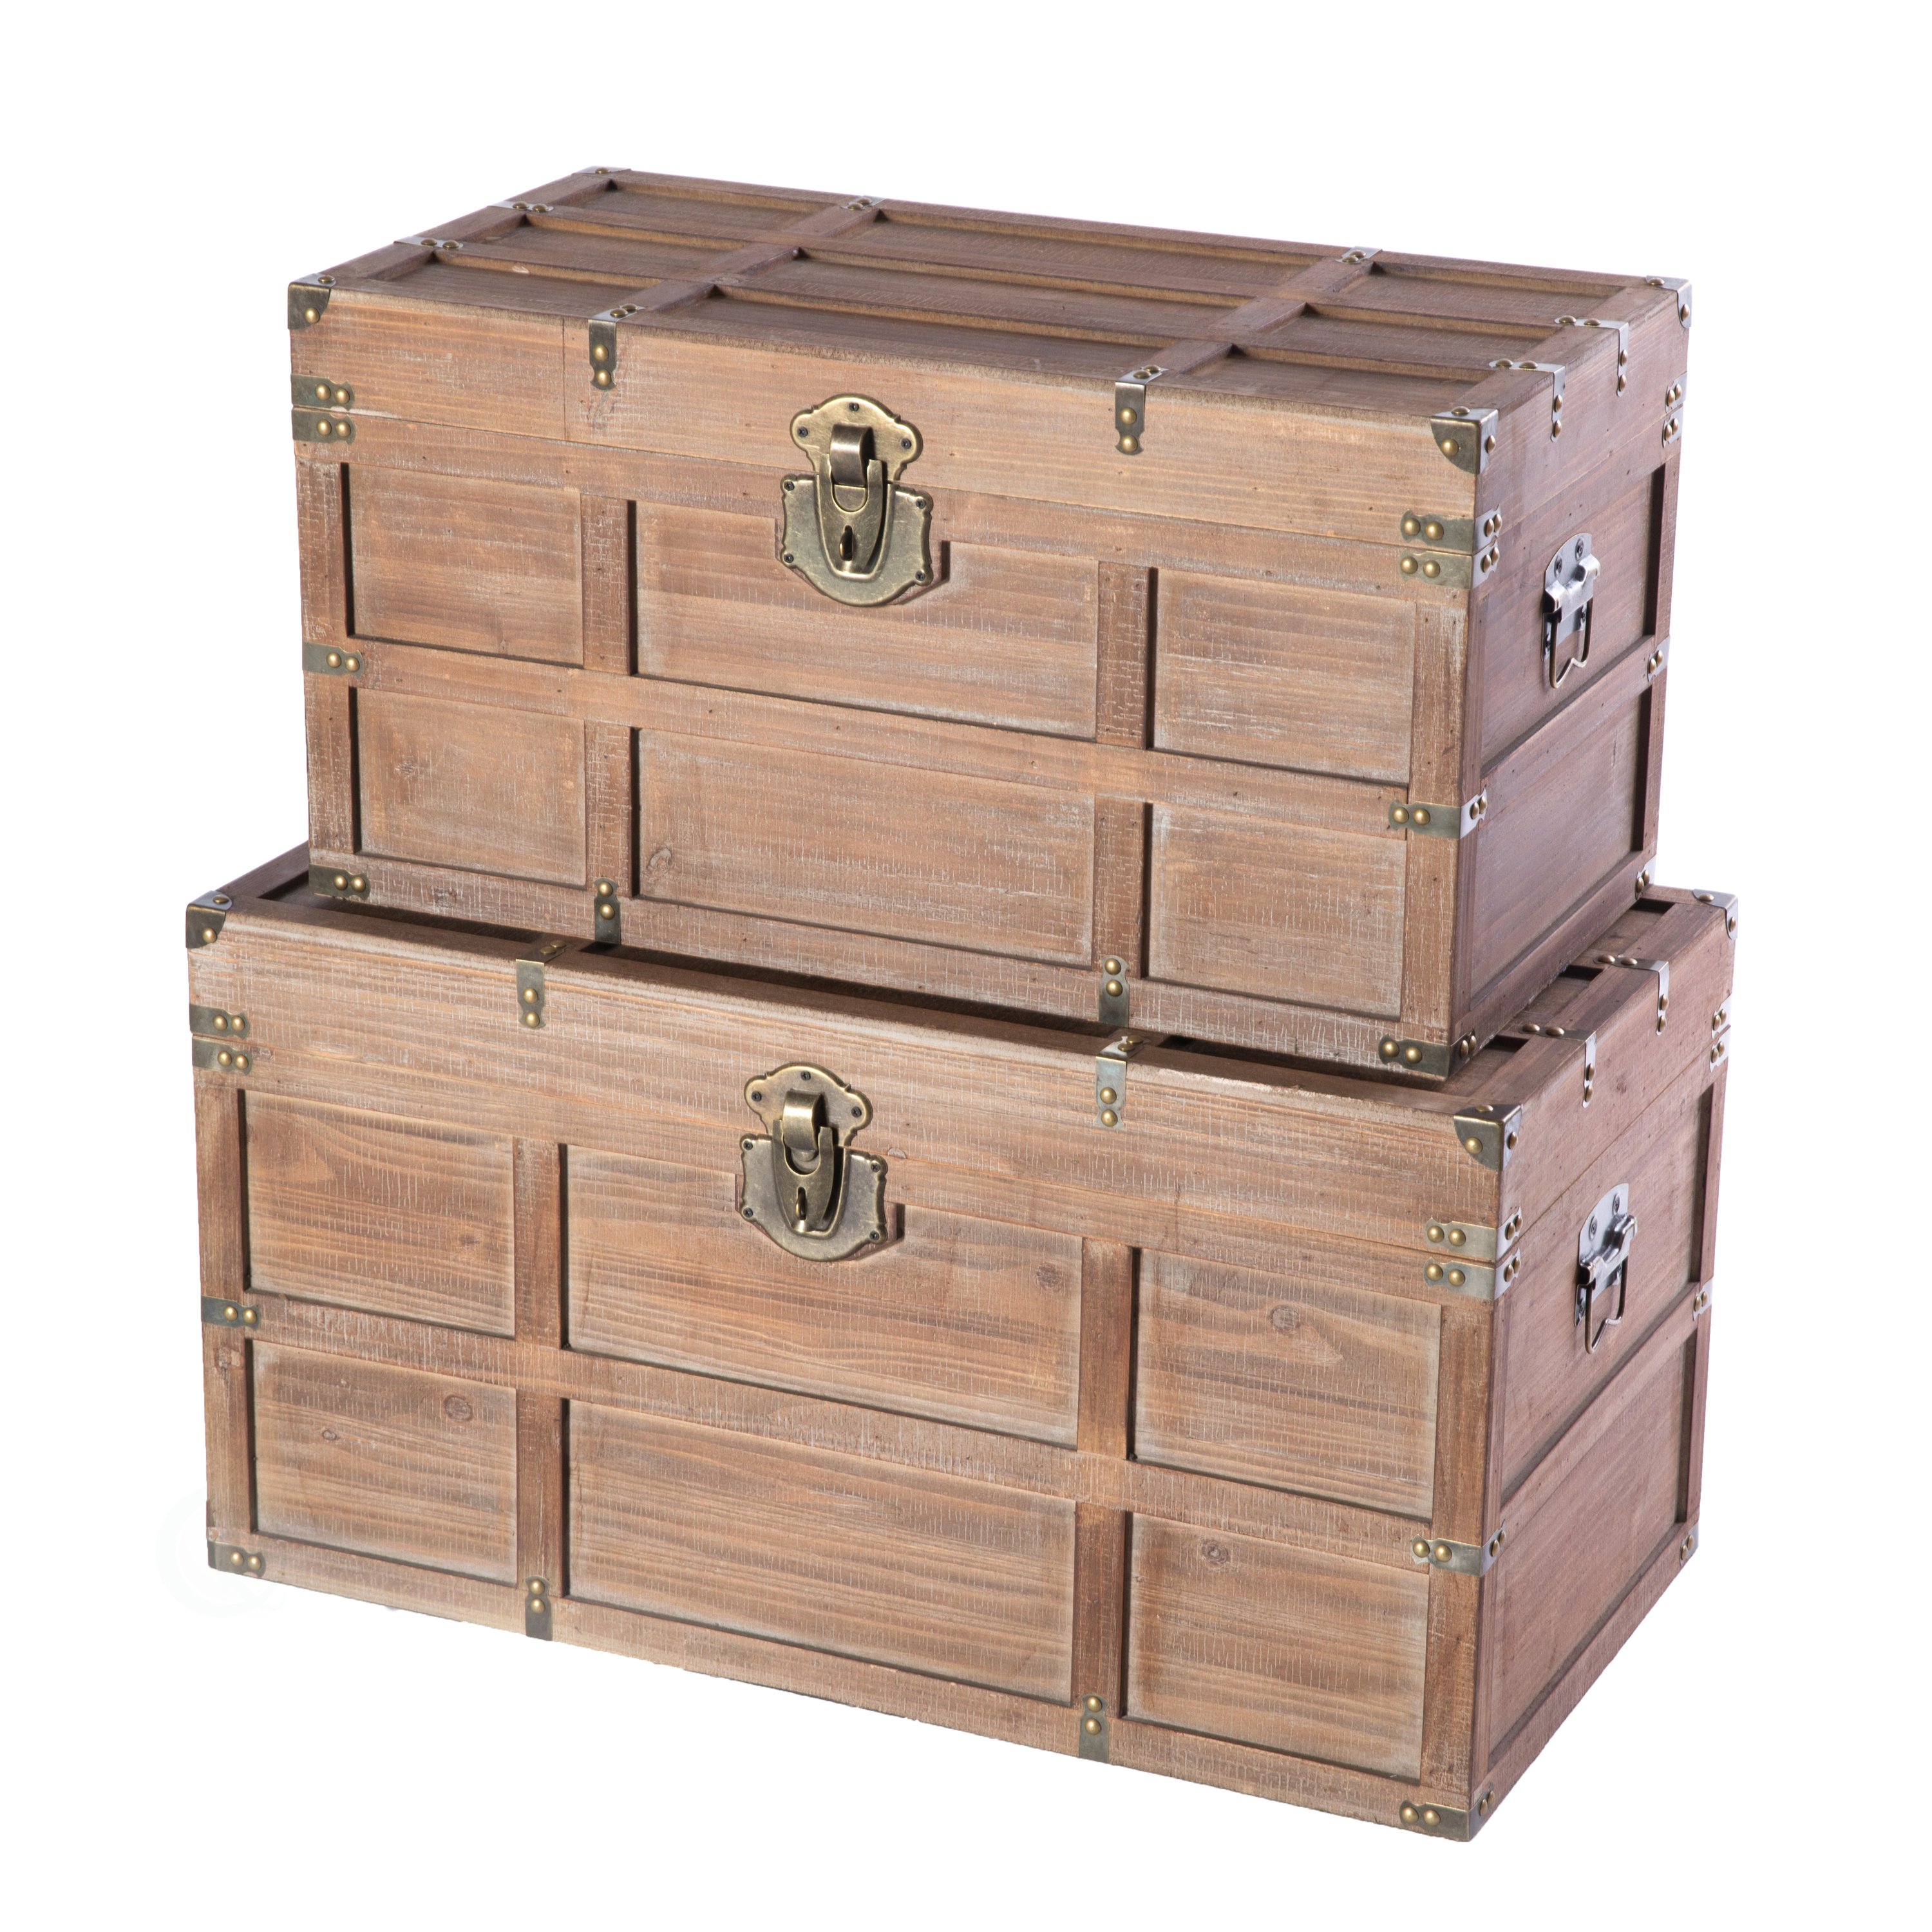 Wooden Rectangular Lined Rustic Storage Trunk With Latc - Large